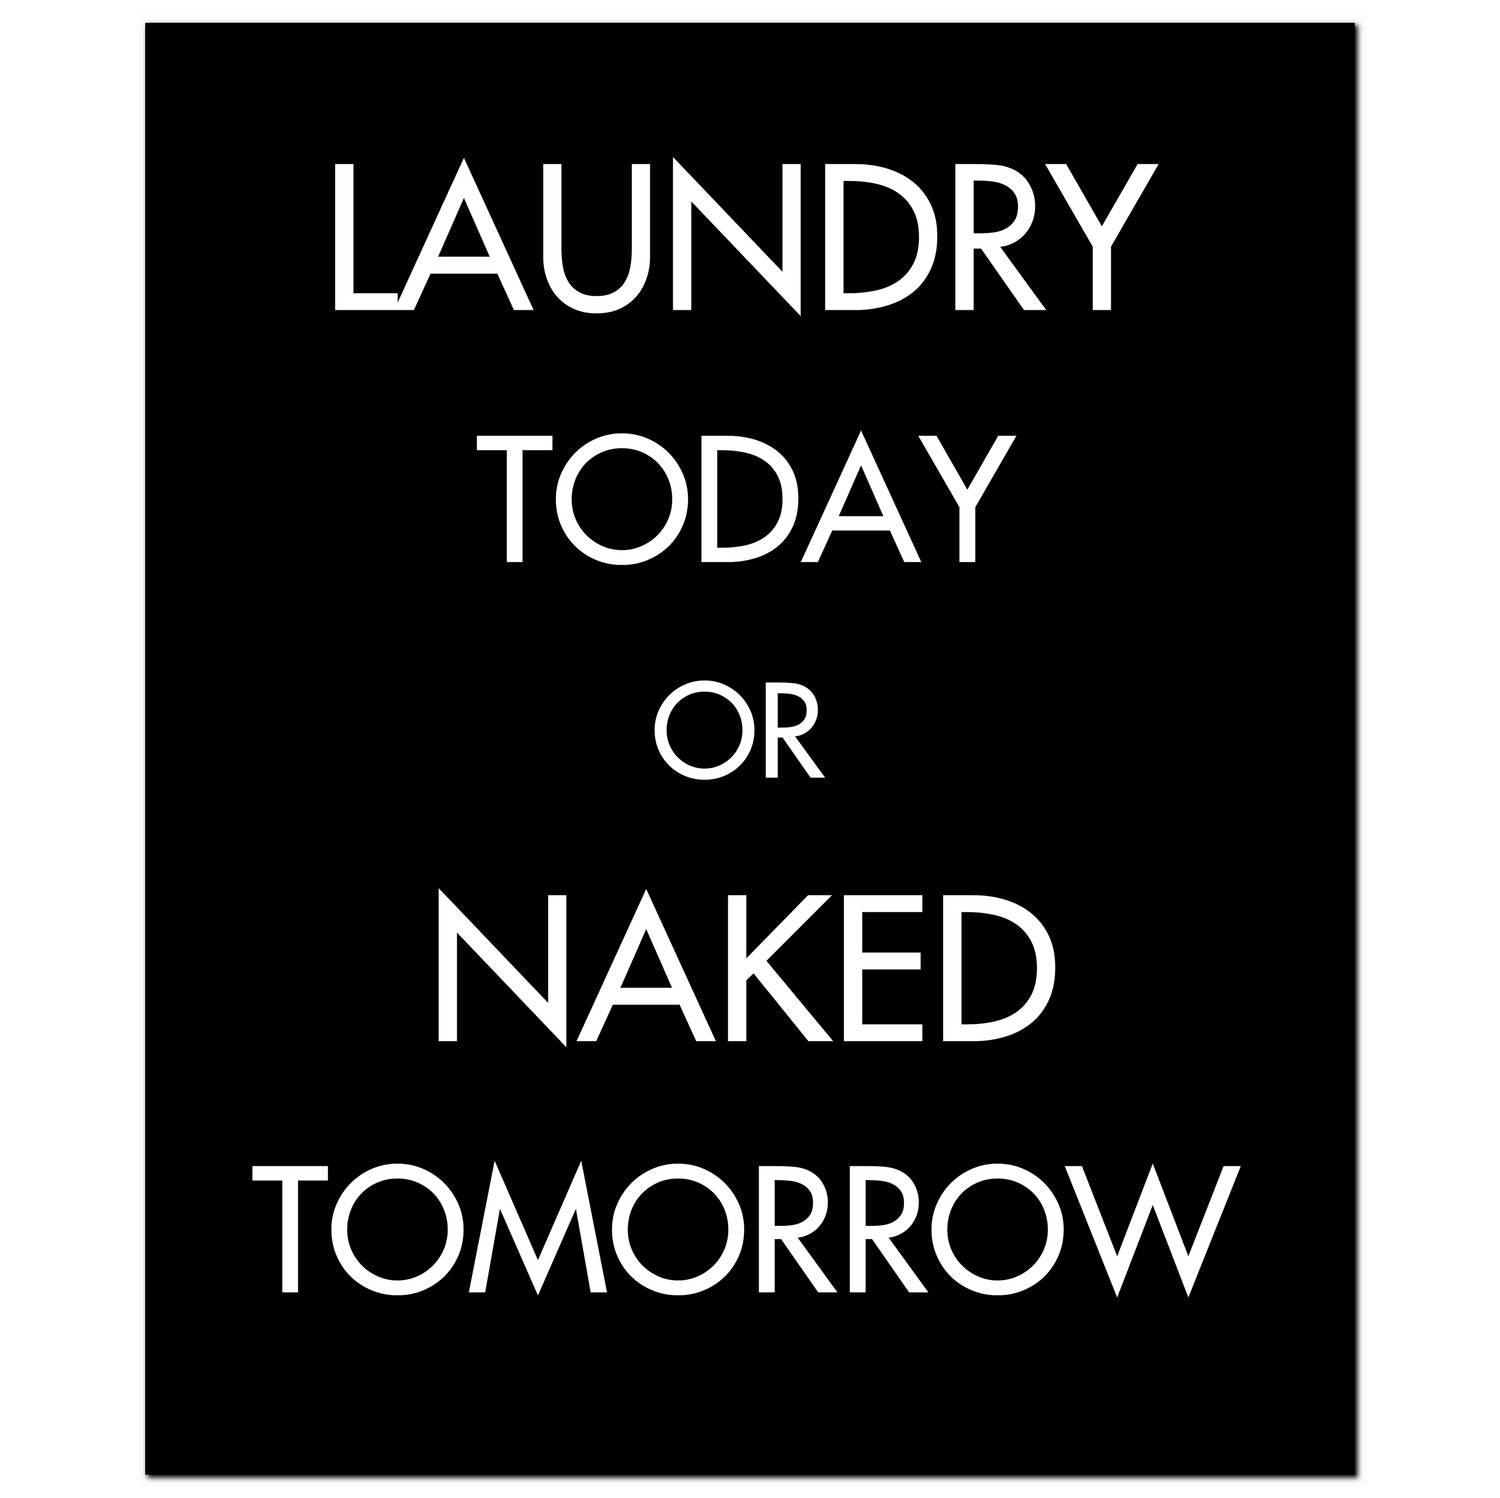 Laundry Today Or Naked Tomorrow Silver Foil Plaque - Vookoo Lifestyle